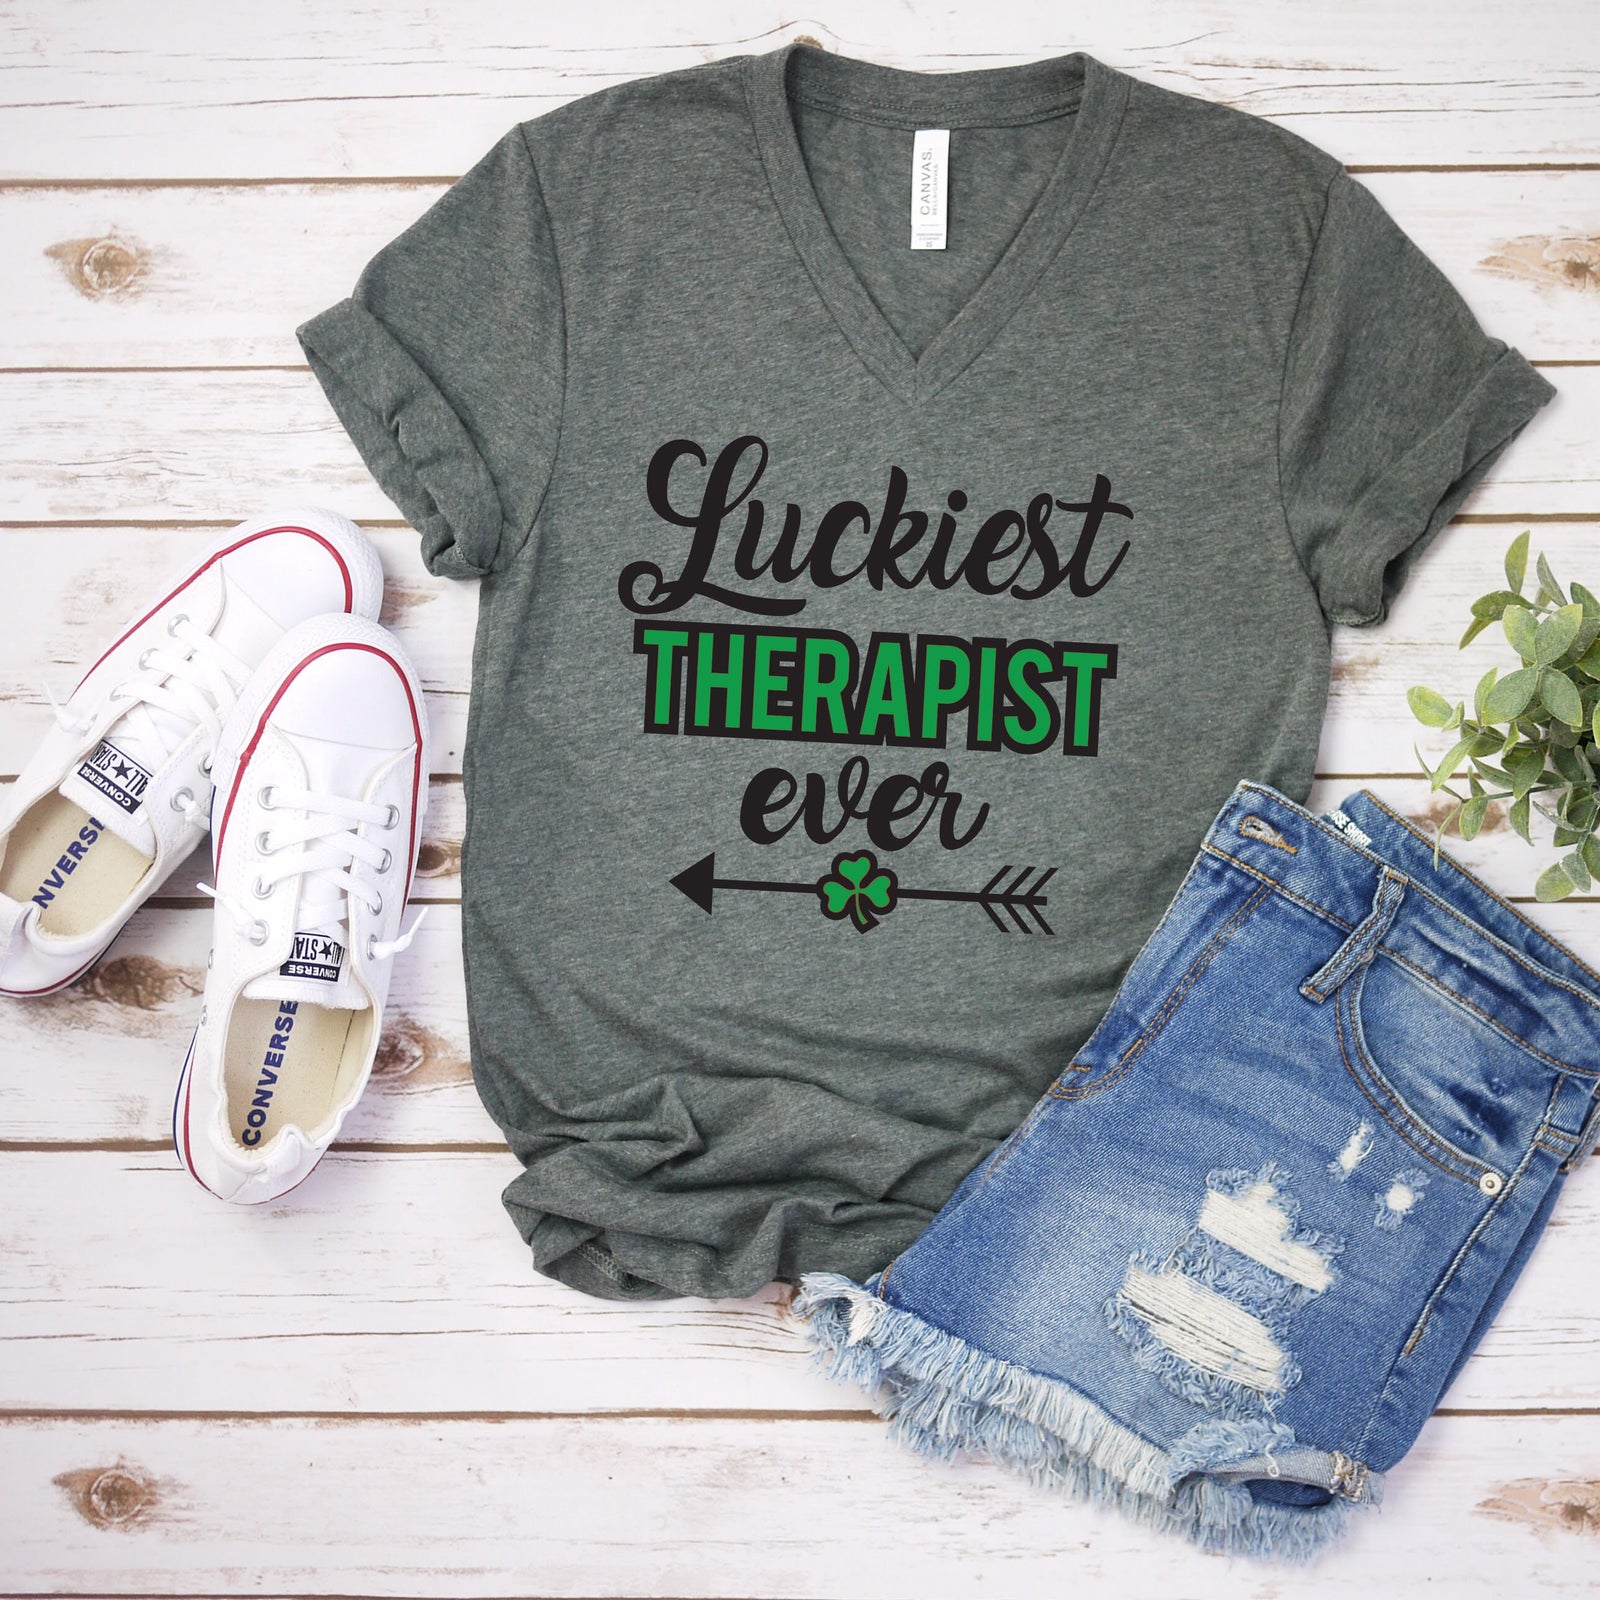 Luckiest Therapist Ever- St. Patrick's Day Shirt - Lucky Therapist Shirt